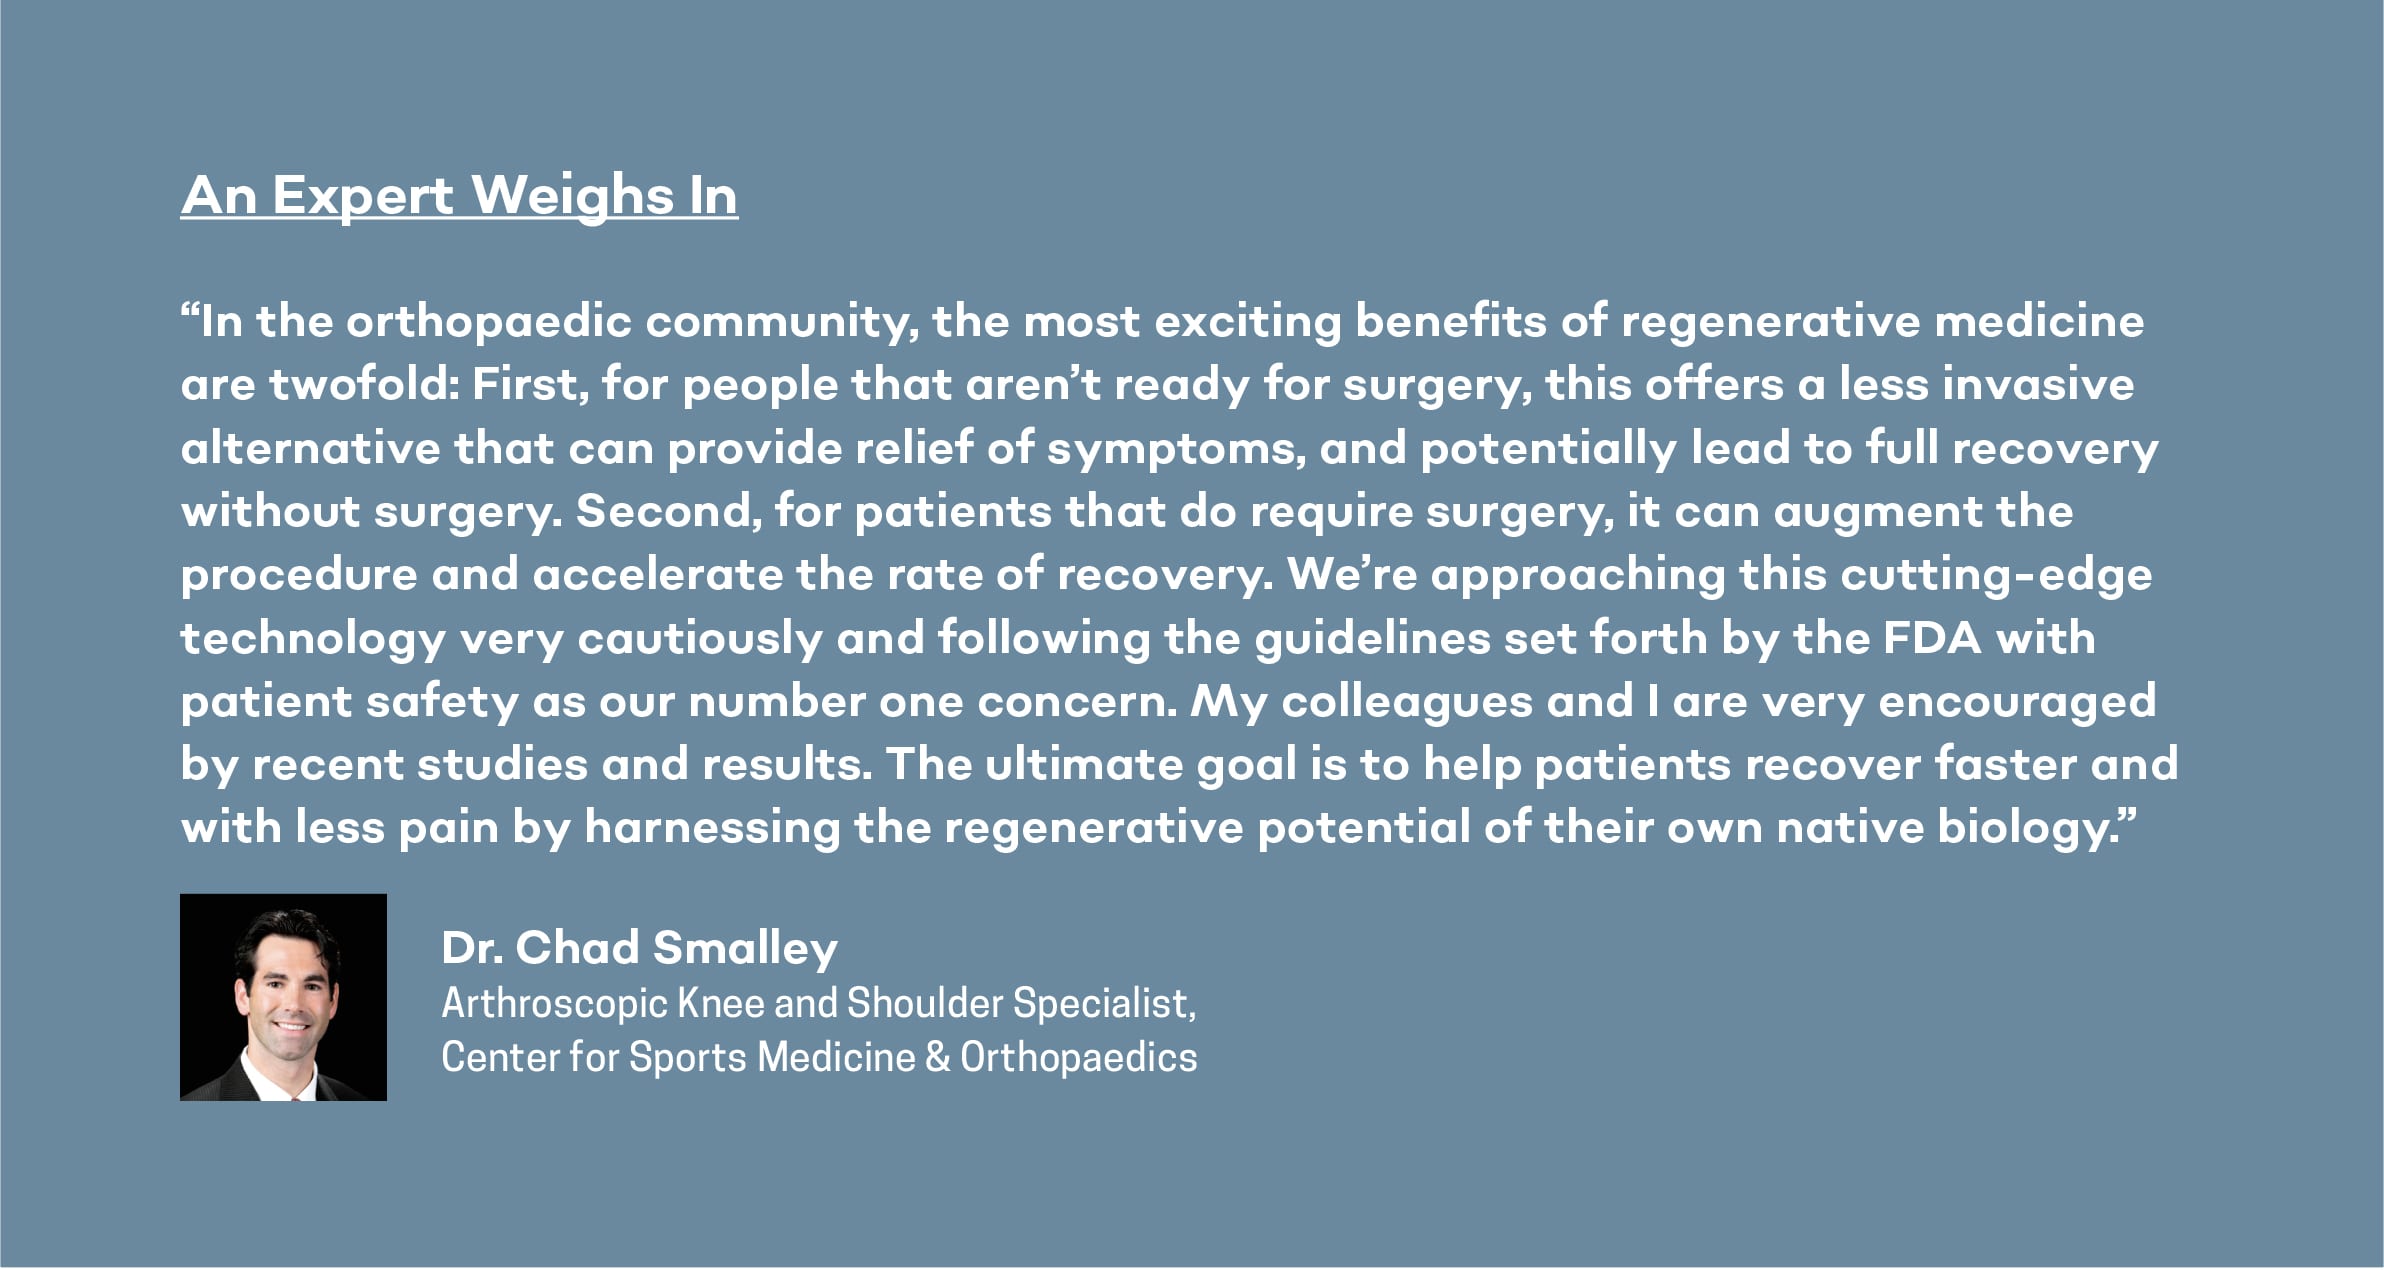 expert opinion about regenerative medicine from dr. chad smalley at center for sports medicine & orthopaedics